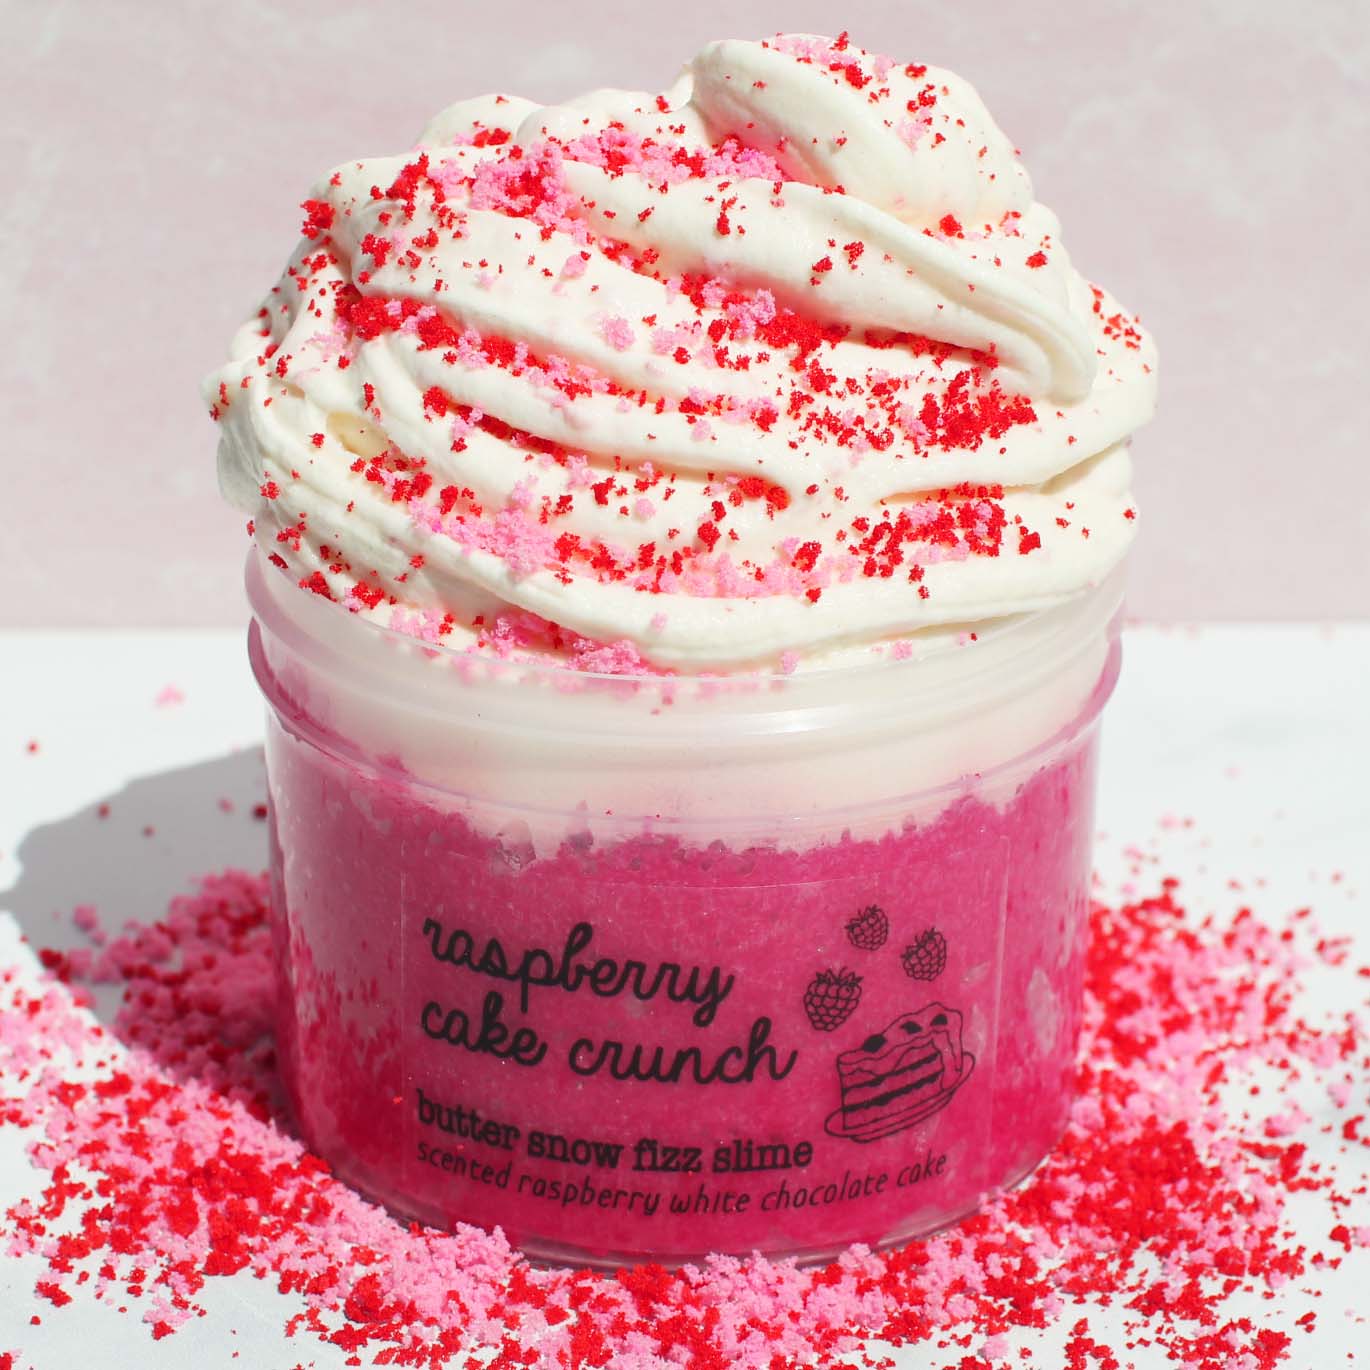 Raspberry Cake Crunch Pink Layered Crunchy Butter Snow Fizz Slime Fantasies Shop 9oz Front View